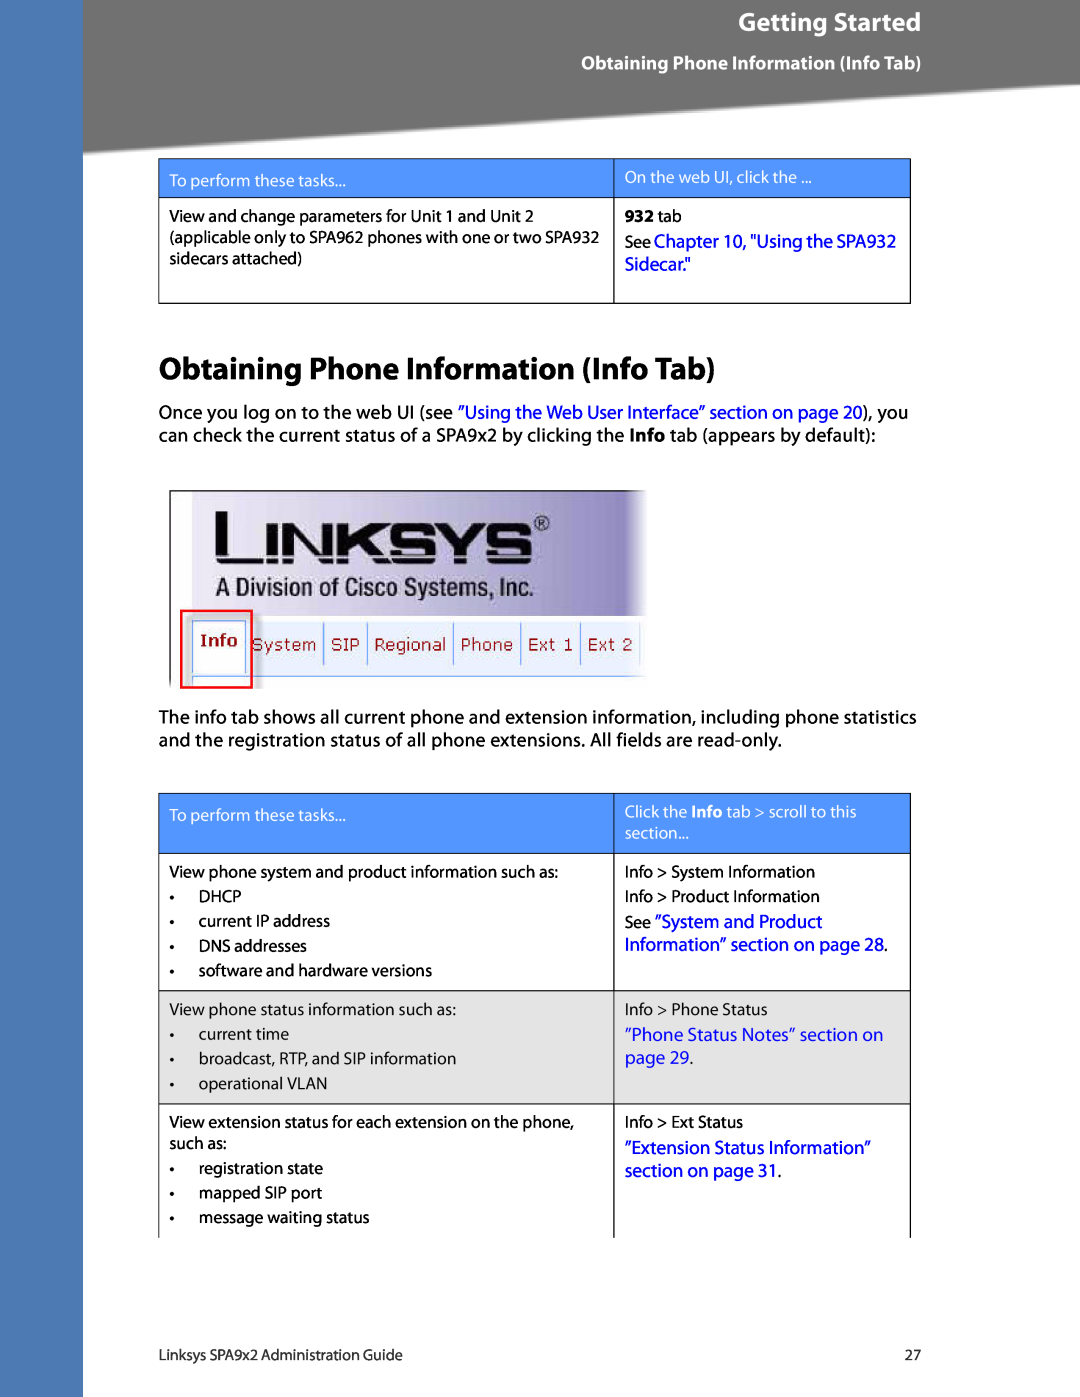 Linksys SPA932 Obtaining Phone Information Info Tab, Sidecar, See ”System and Product, Information” section on page, tab 